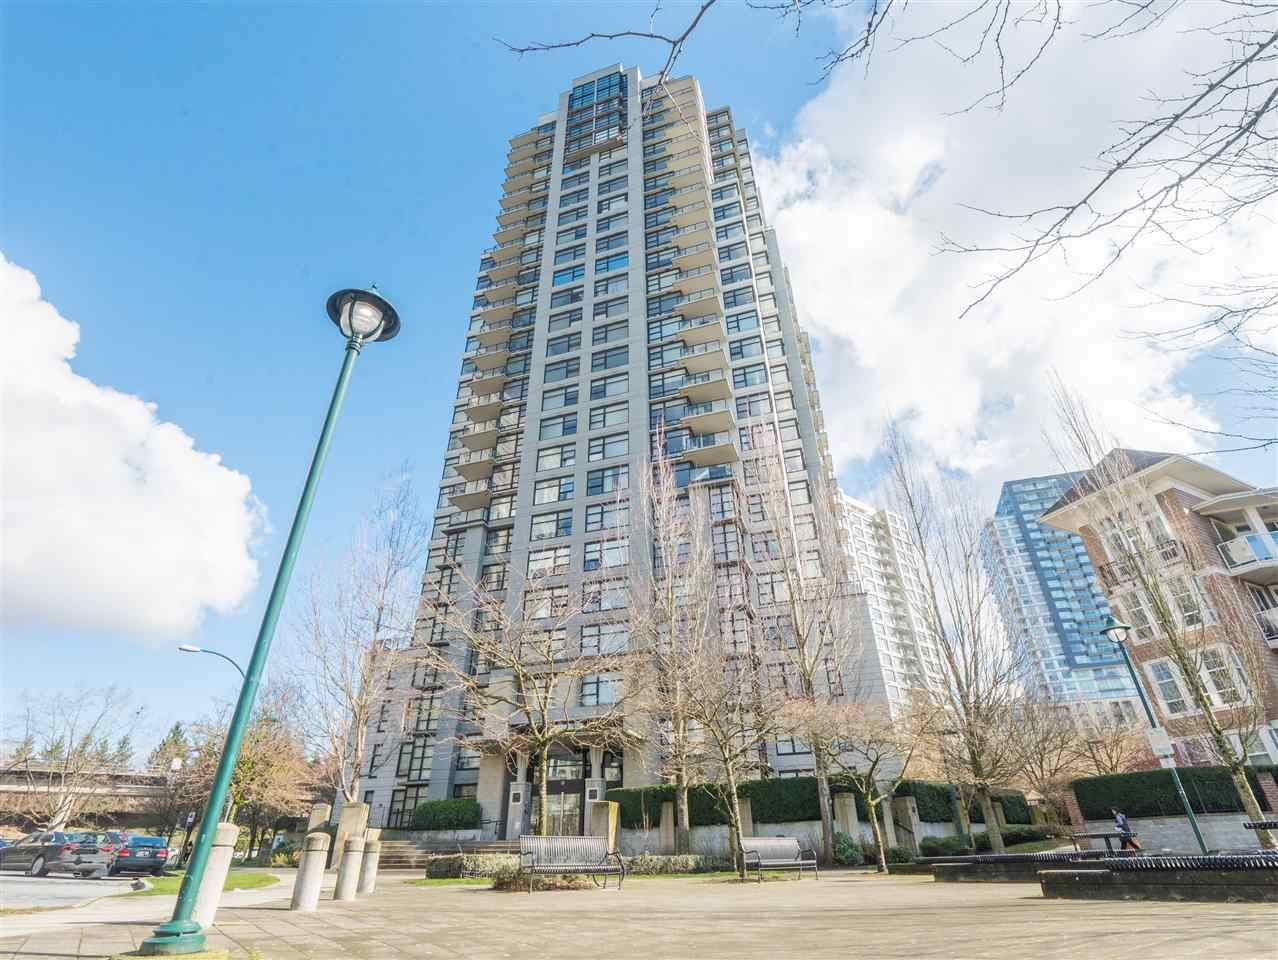 Main Photo: 1708 5380 OBEN STREET in Vancouver: Collingwood VE Condo for sale (Vancouver East)  : MLS®# R2445259